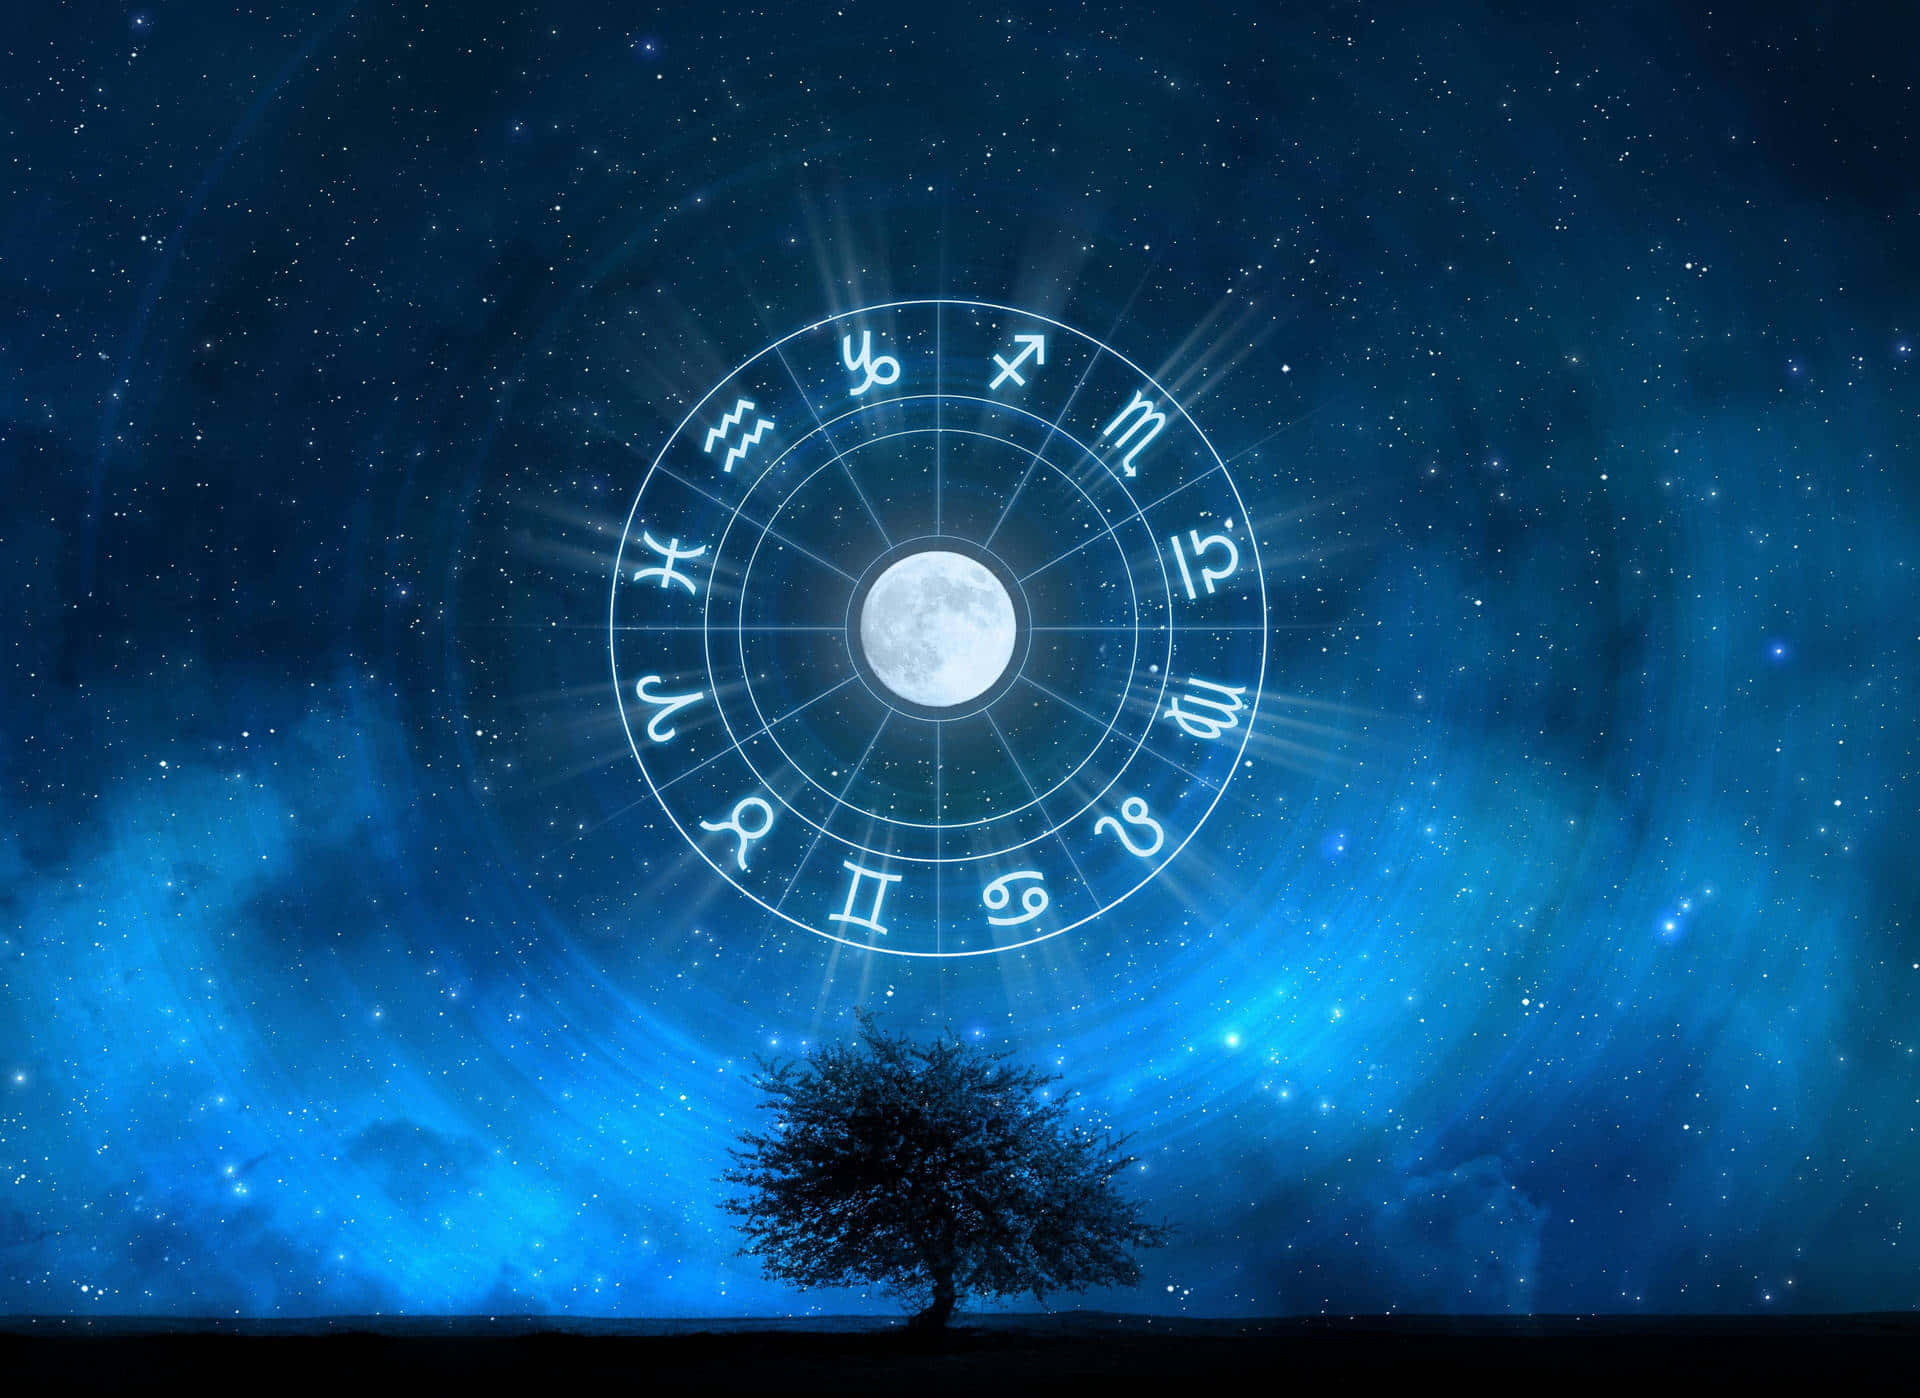 "Exploring the mysteries of Aesthetic Astrology" Wallpaper